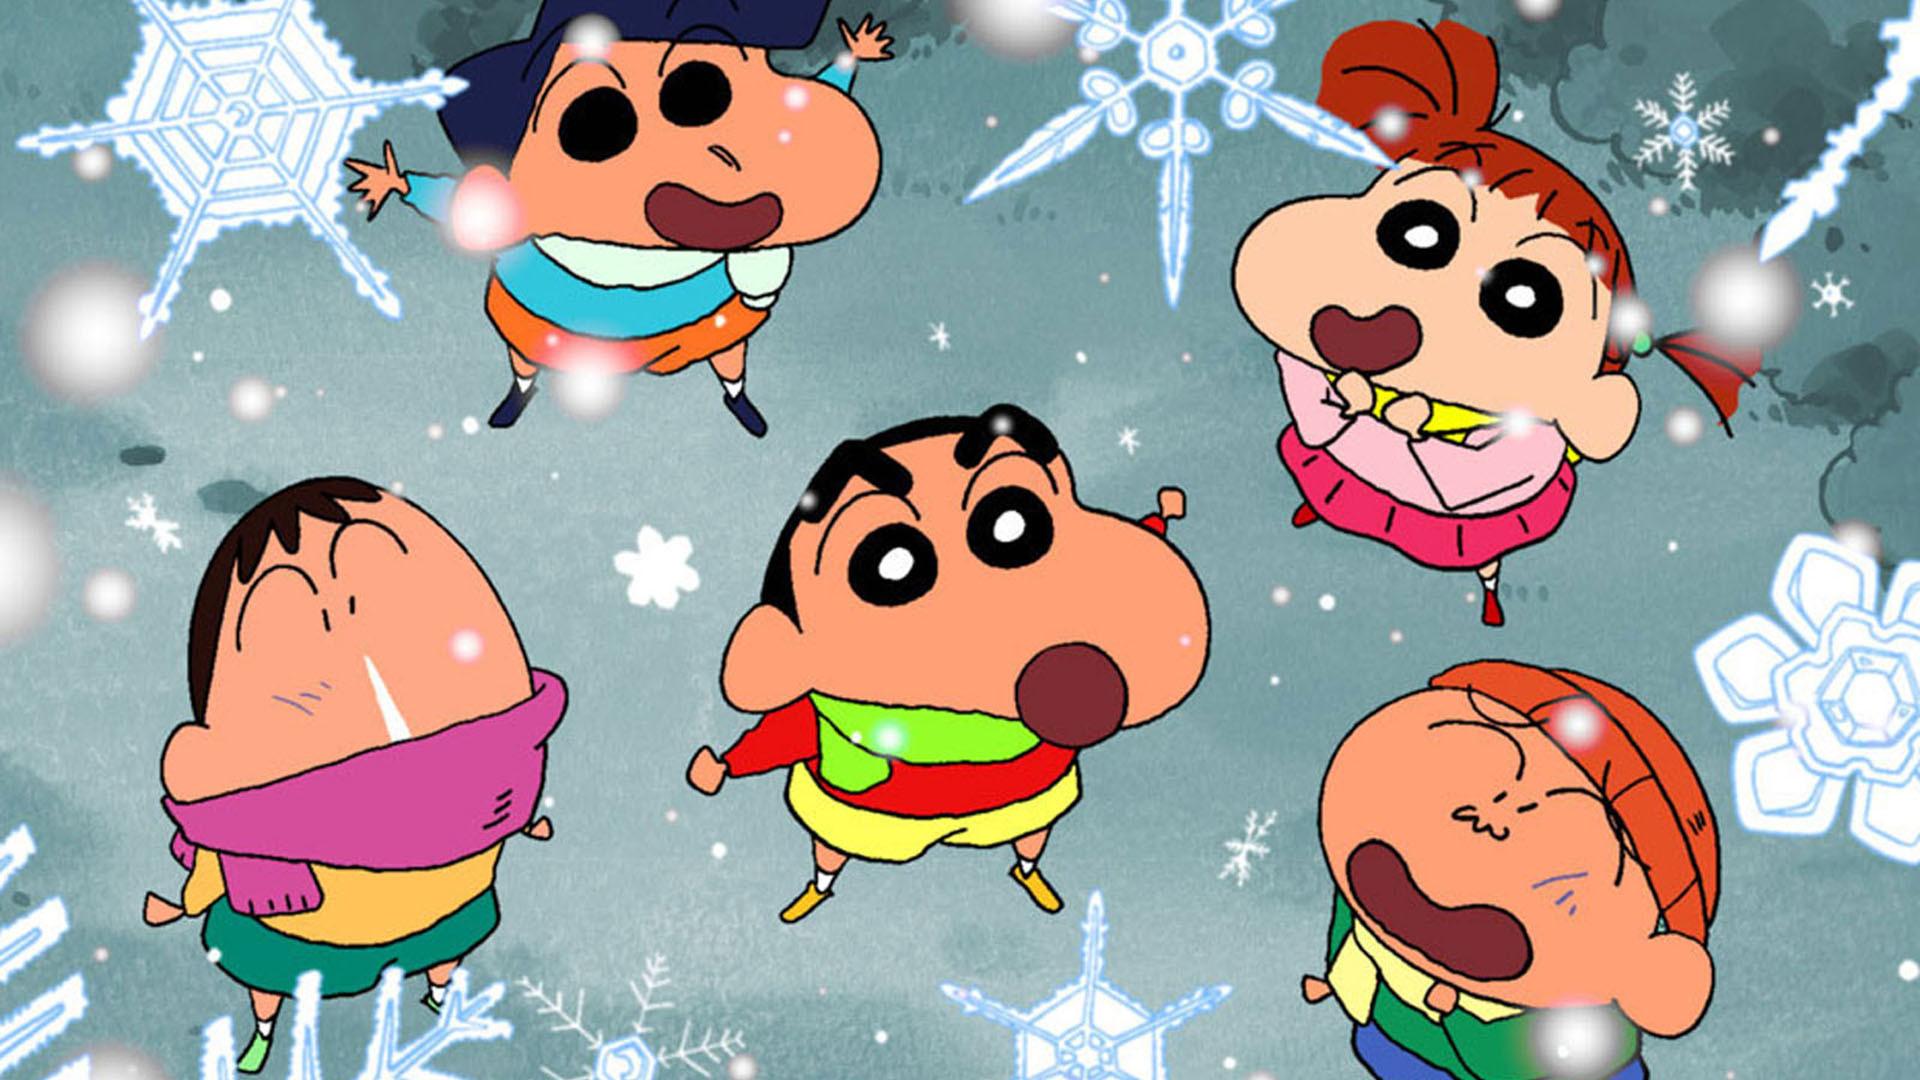 Shin Chan Movie Wallpapers - Wallpaper Cave